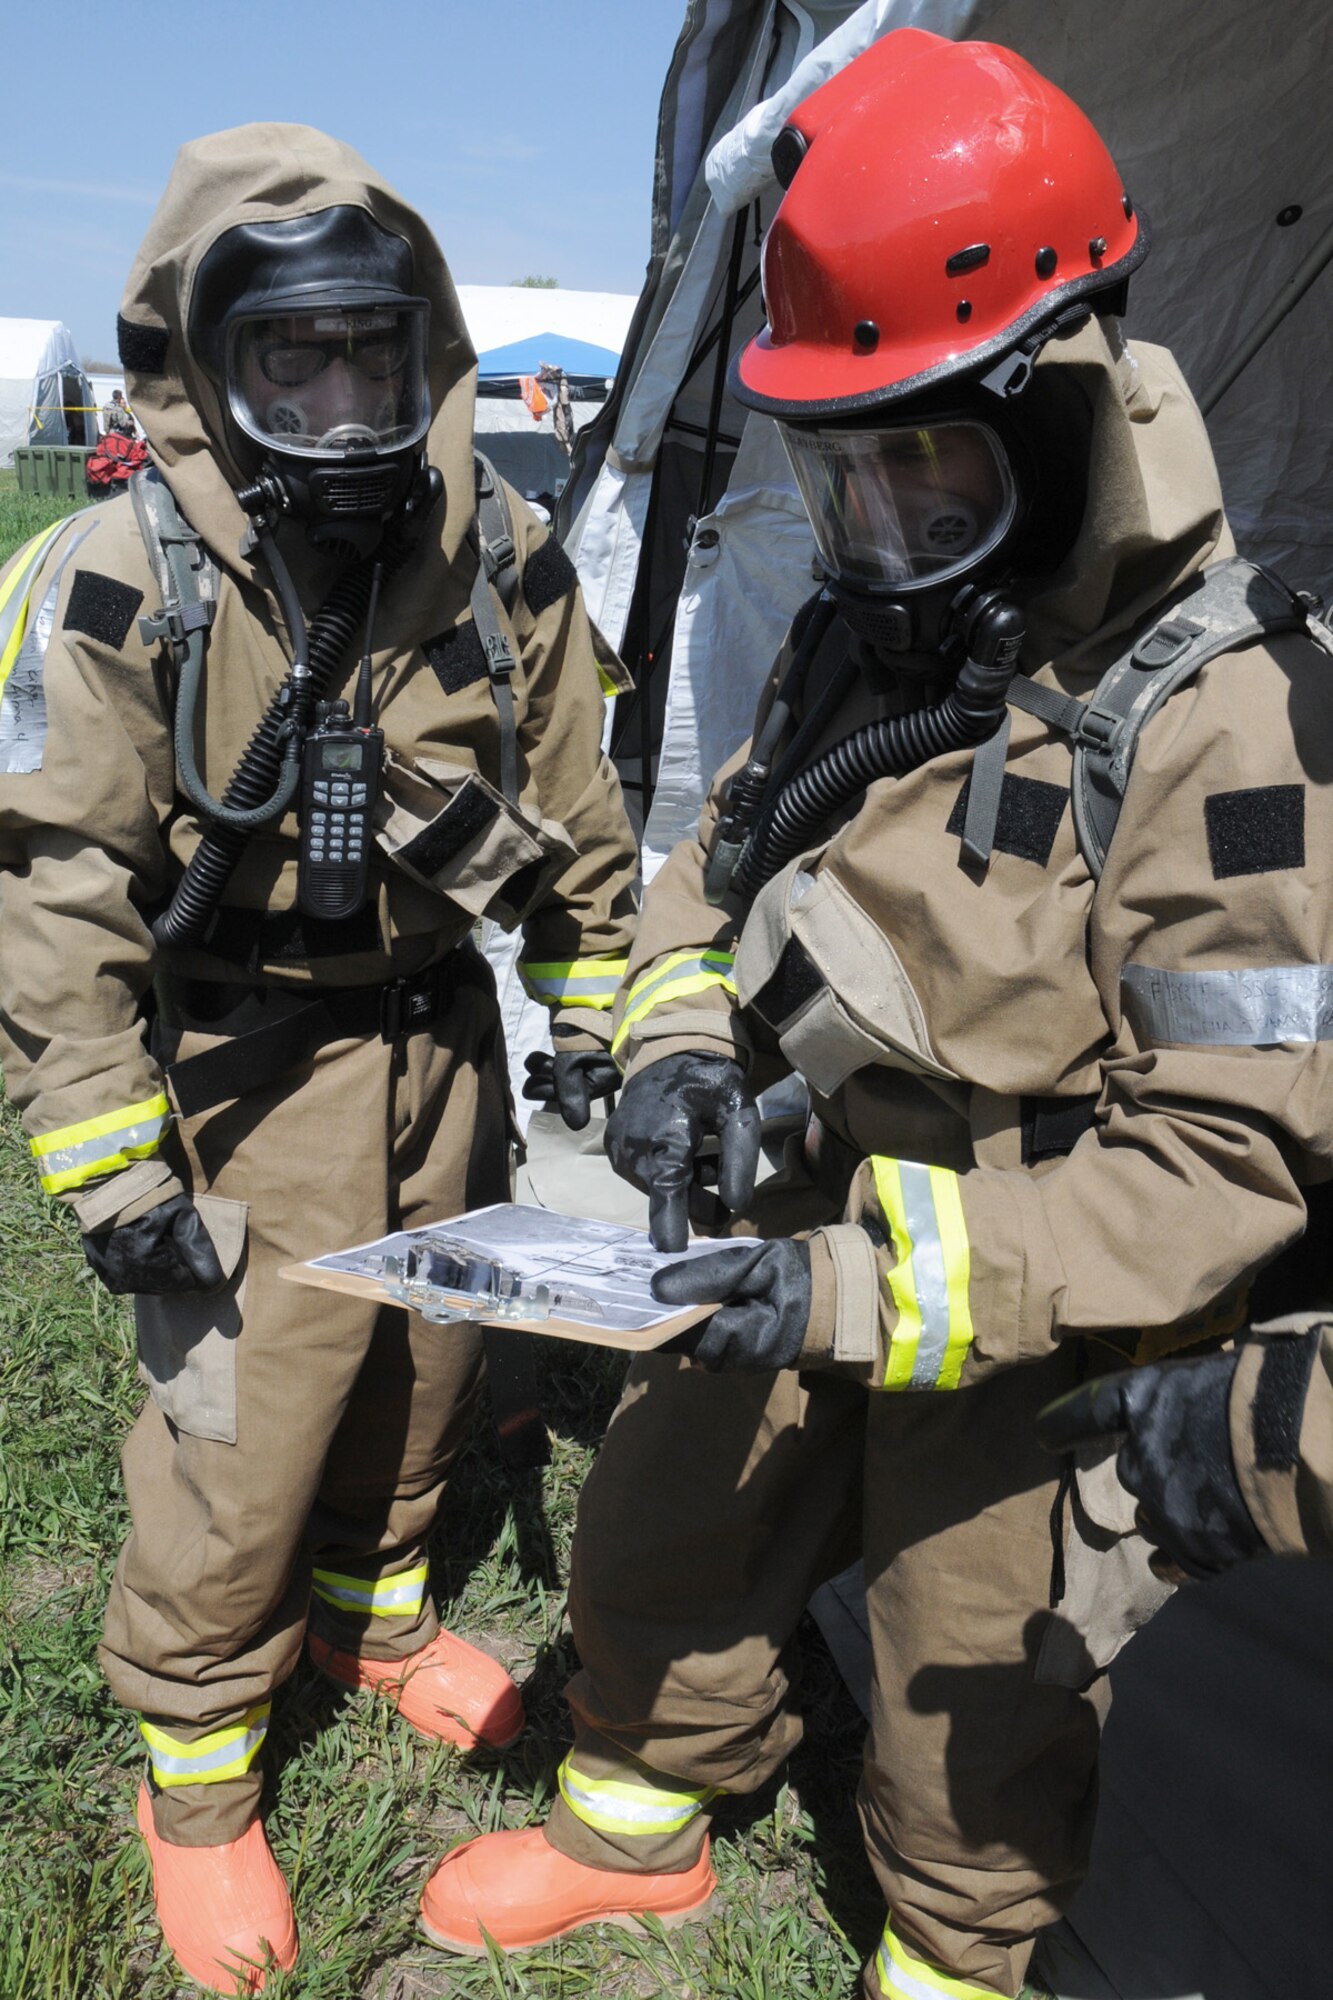 Staff Sgt. Ryan King (left), FSRT team member, and Staff Sgt. Jonathan Clayberg (right), FSRT team member review a site map for known fatalities before they enter the "hot zone" at Camp Ashland, Nebraska, on May 17, 2013. A reconnaissance team enters the area first and comes back with mark maps so the team can develop a plan for their recovery mission.  (U.S. Air National Guard photo by Tech. Sgt. Sara M. Robinson/Released)